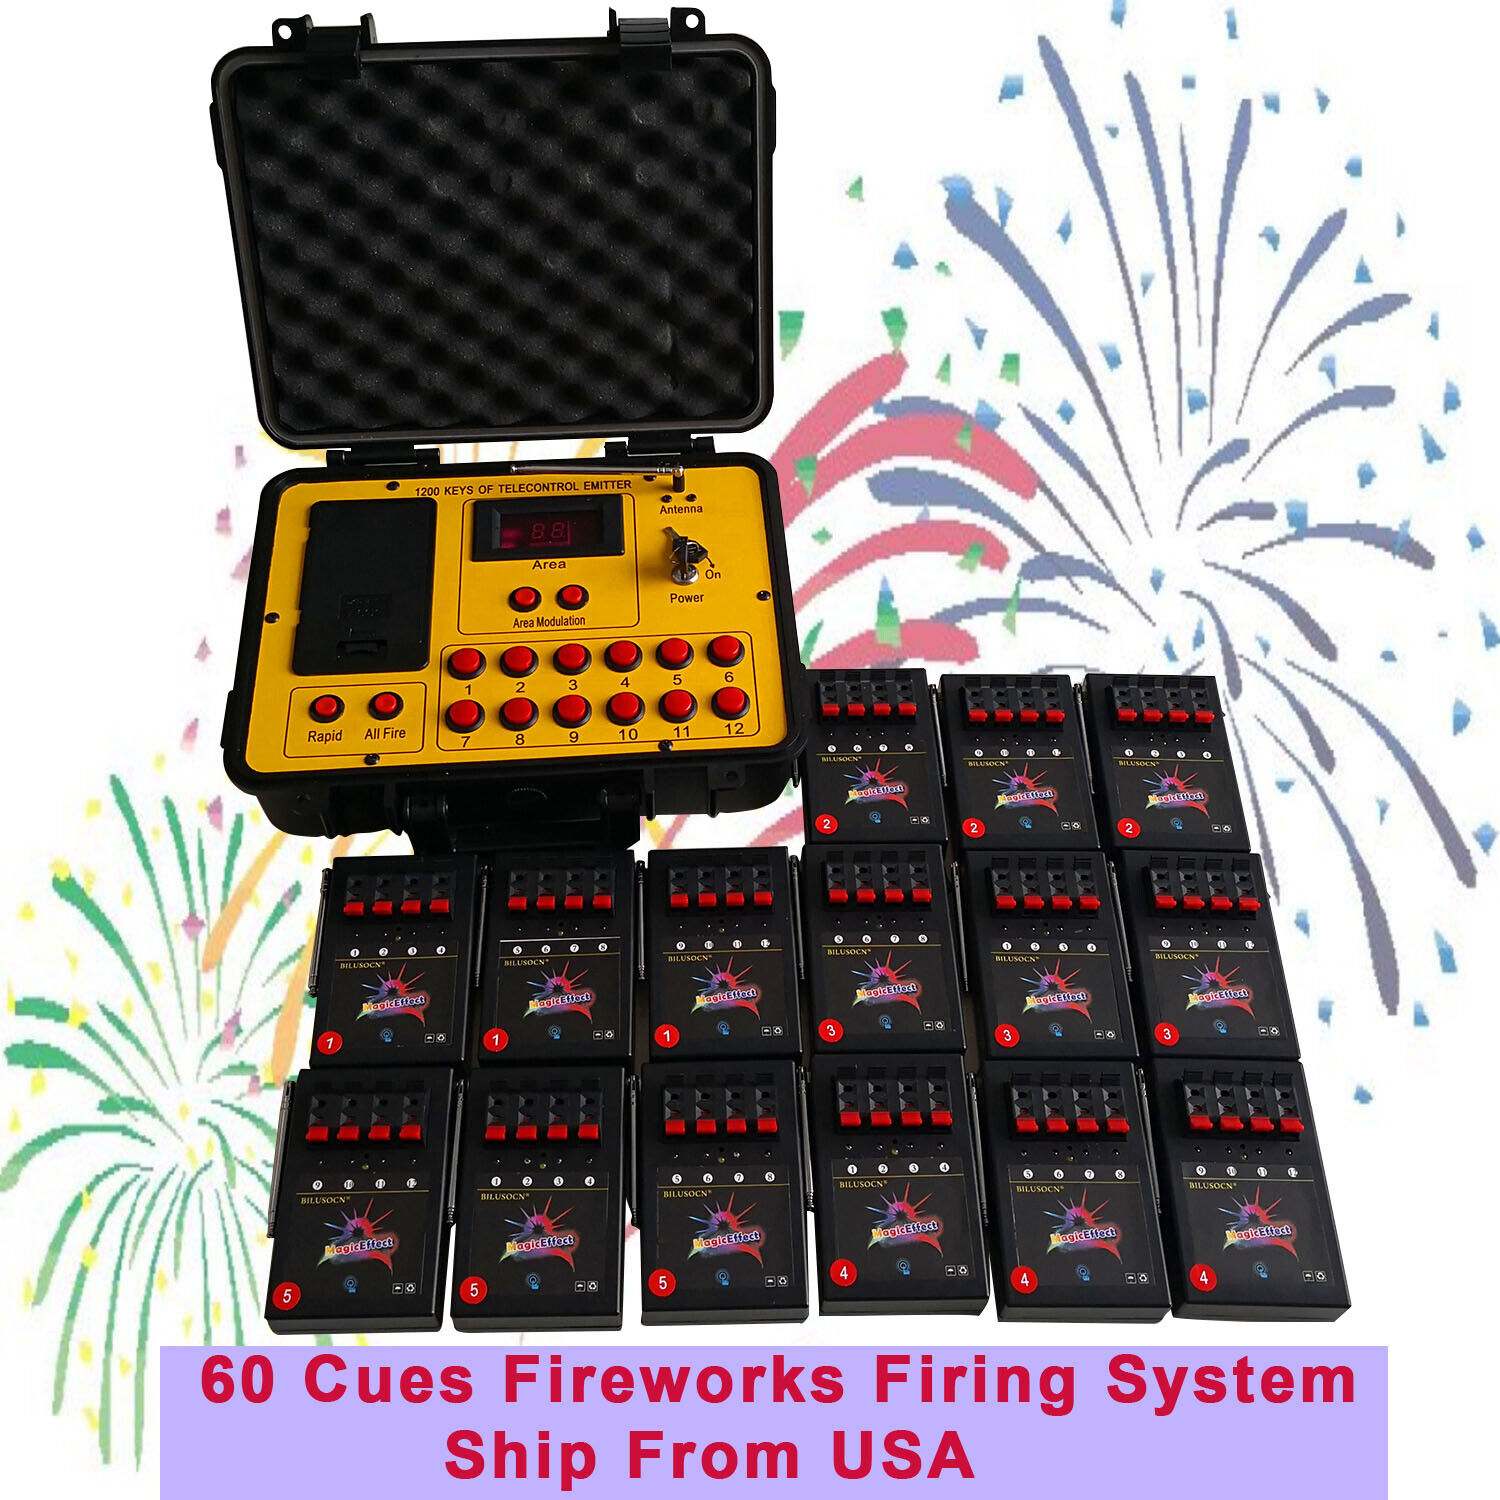 60 Cues fireworks firing system Ship From USA 500M ABS Waterproof Case Control